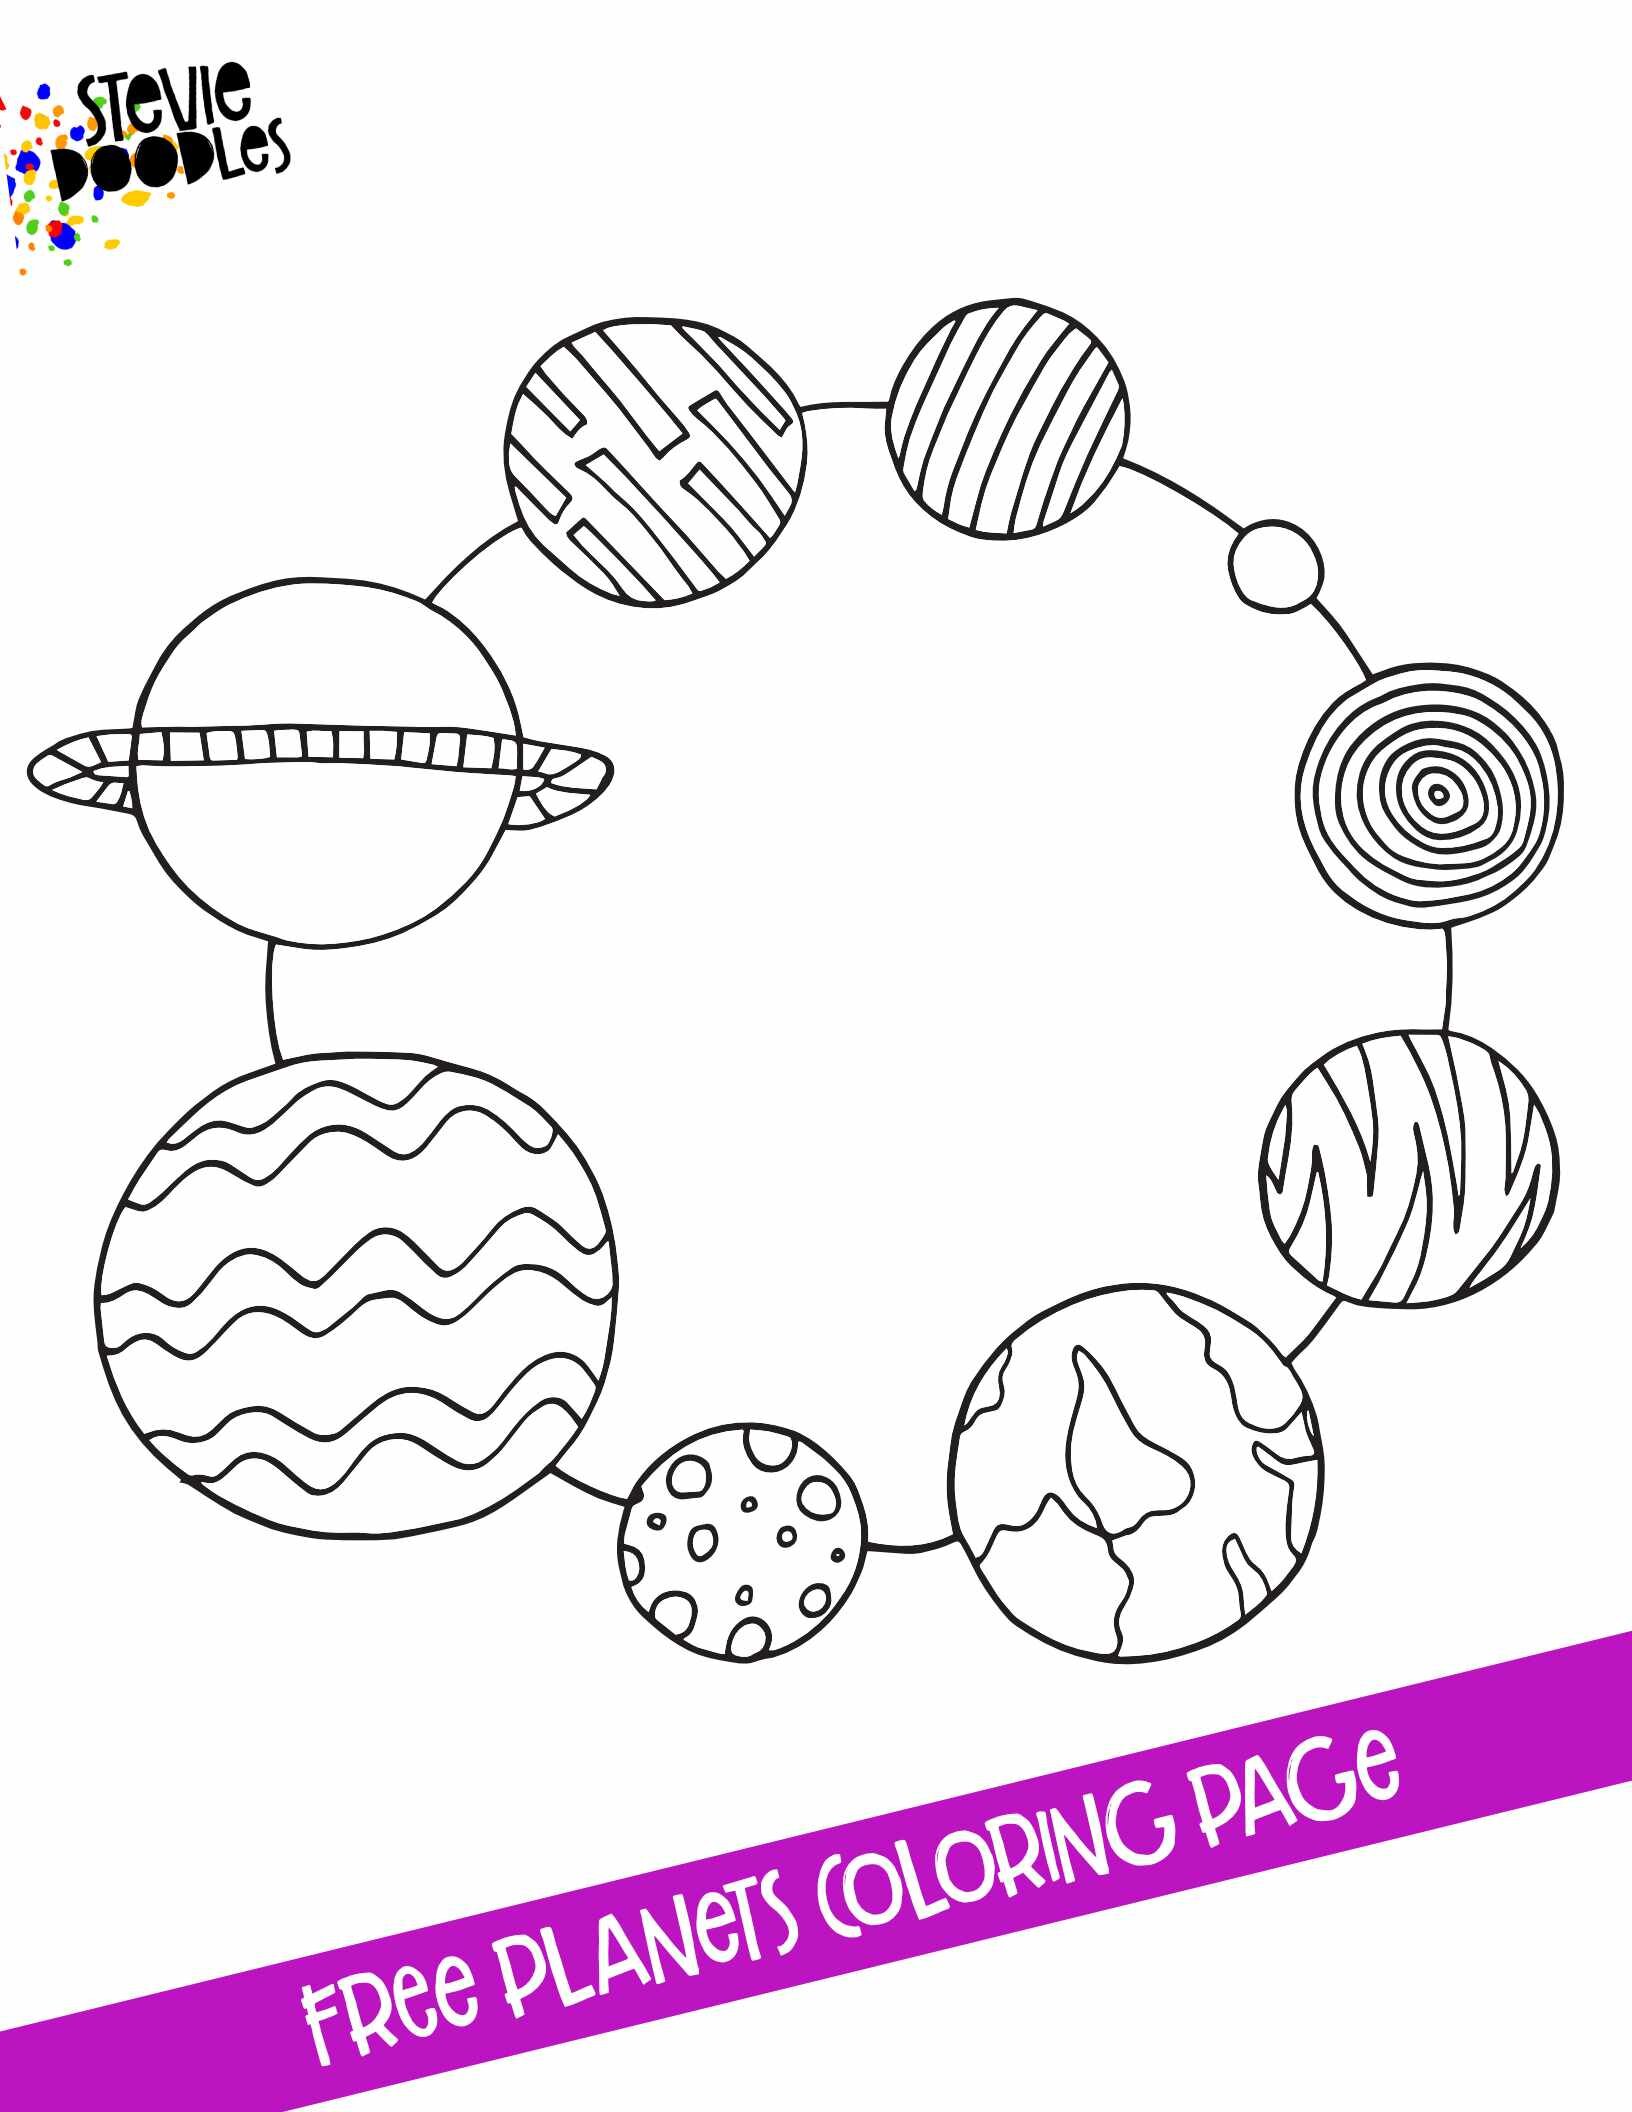 Ring of Planets   Free Printable Coloring Page — Stevie Doodles ...